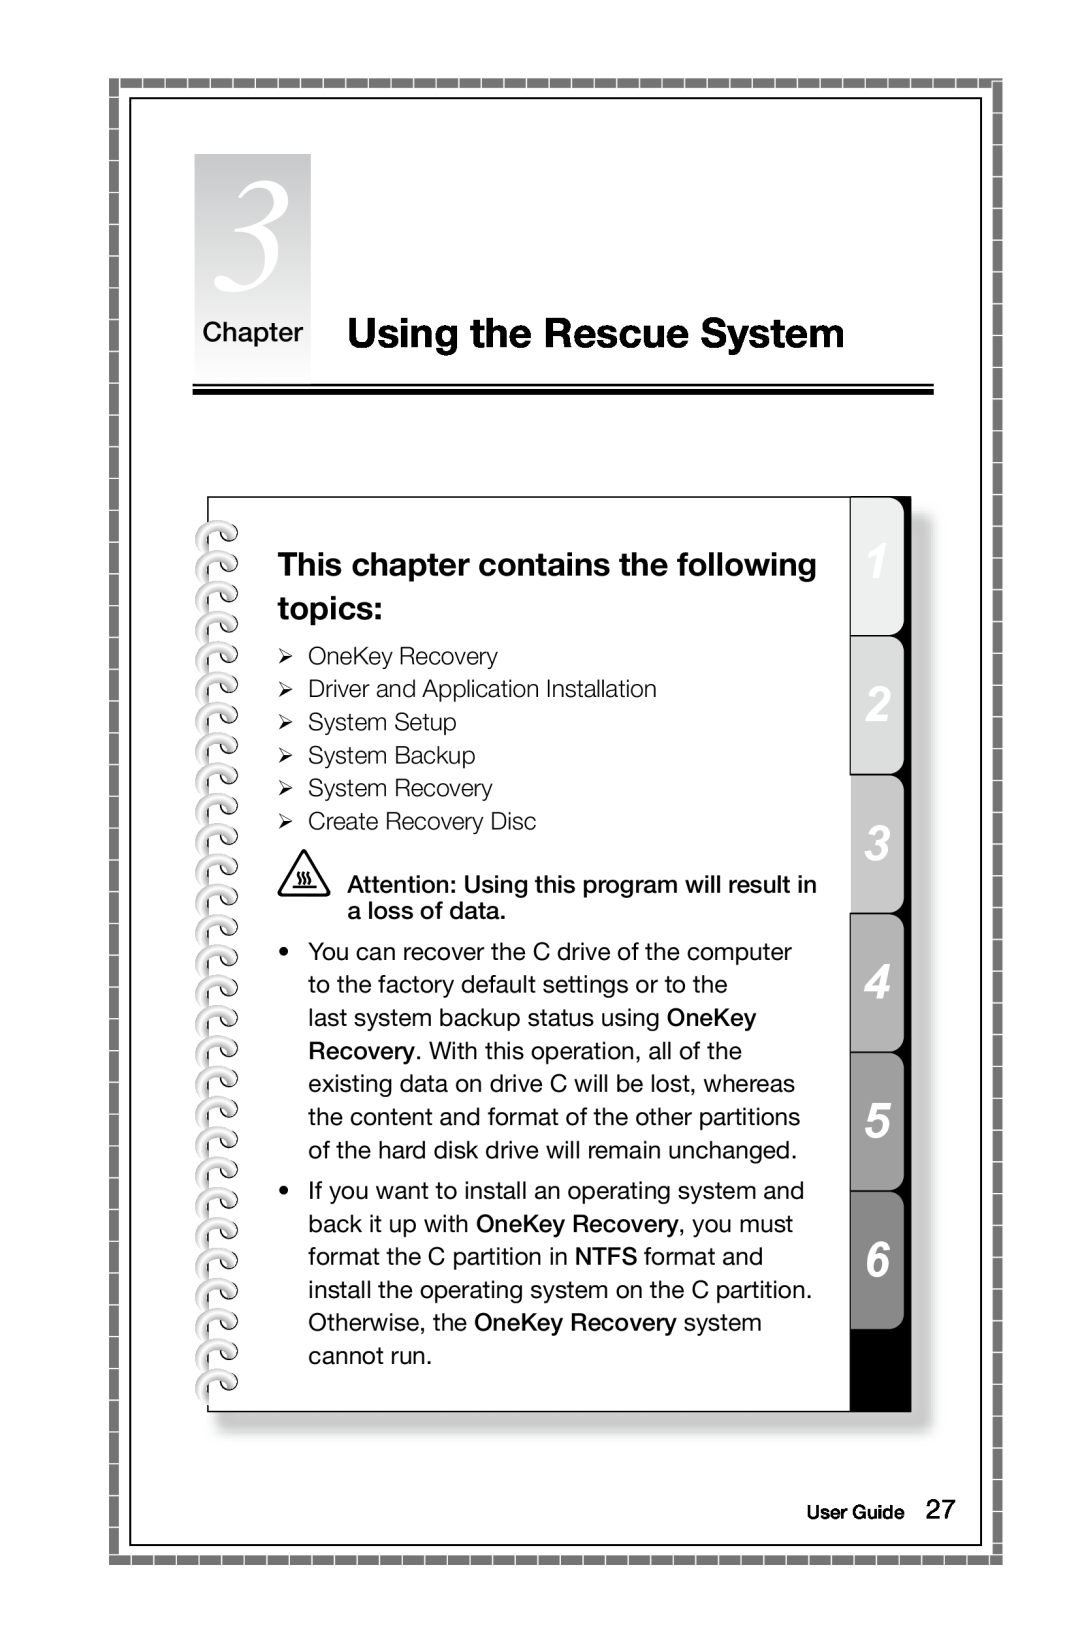 Lenovo 10052, B3, 10051 manual Chapter Using the Rescue System, This chapter contains the following topics 